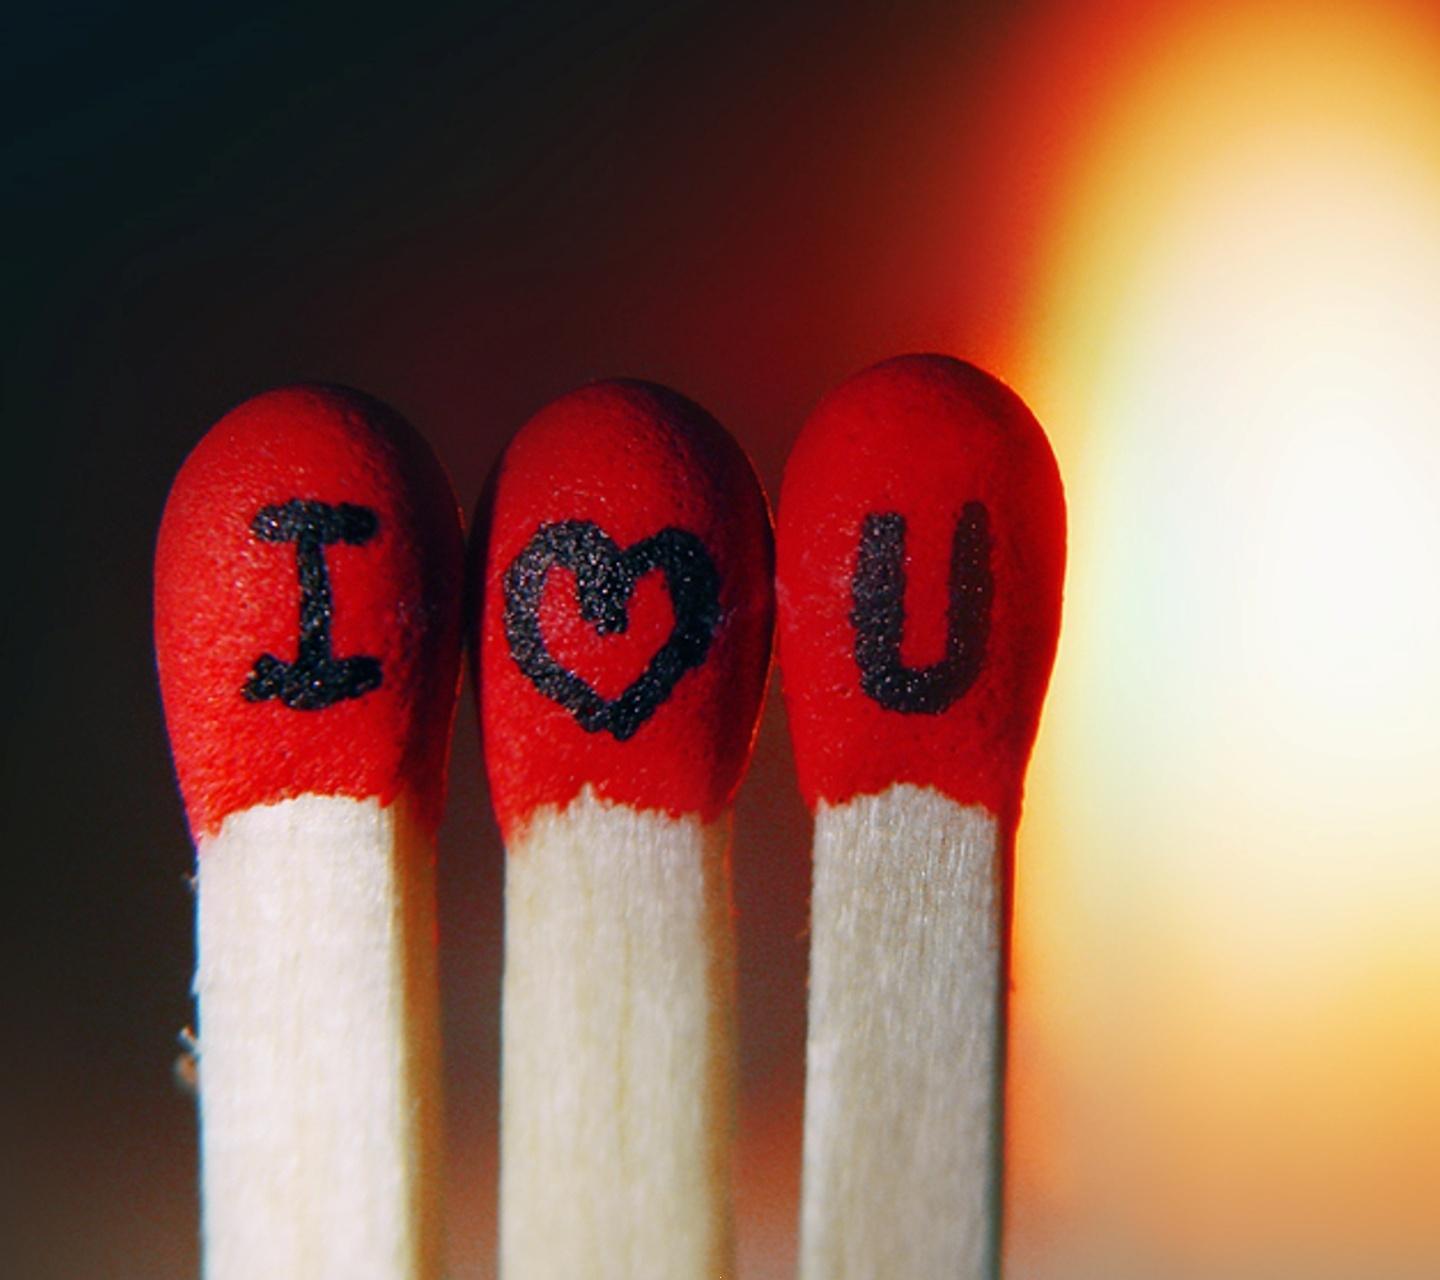 Download I love you hd wallpaper for iphone - Love and ...